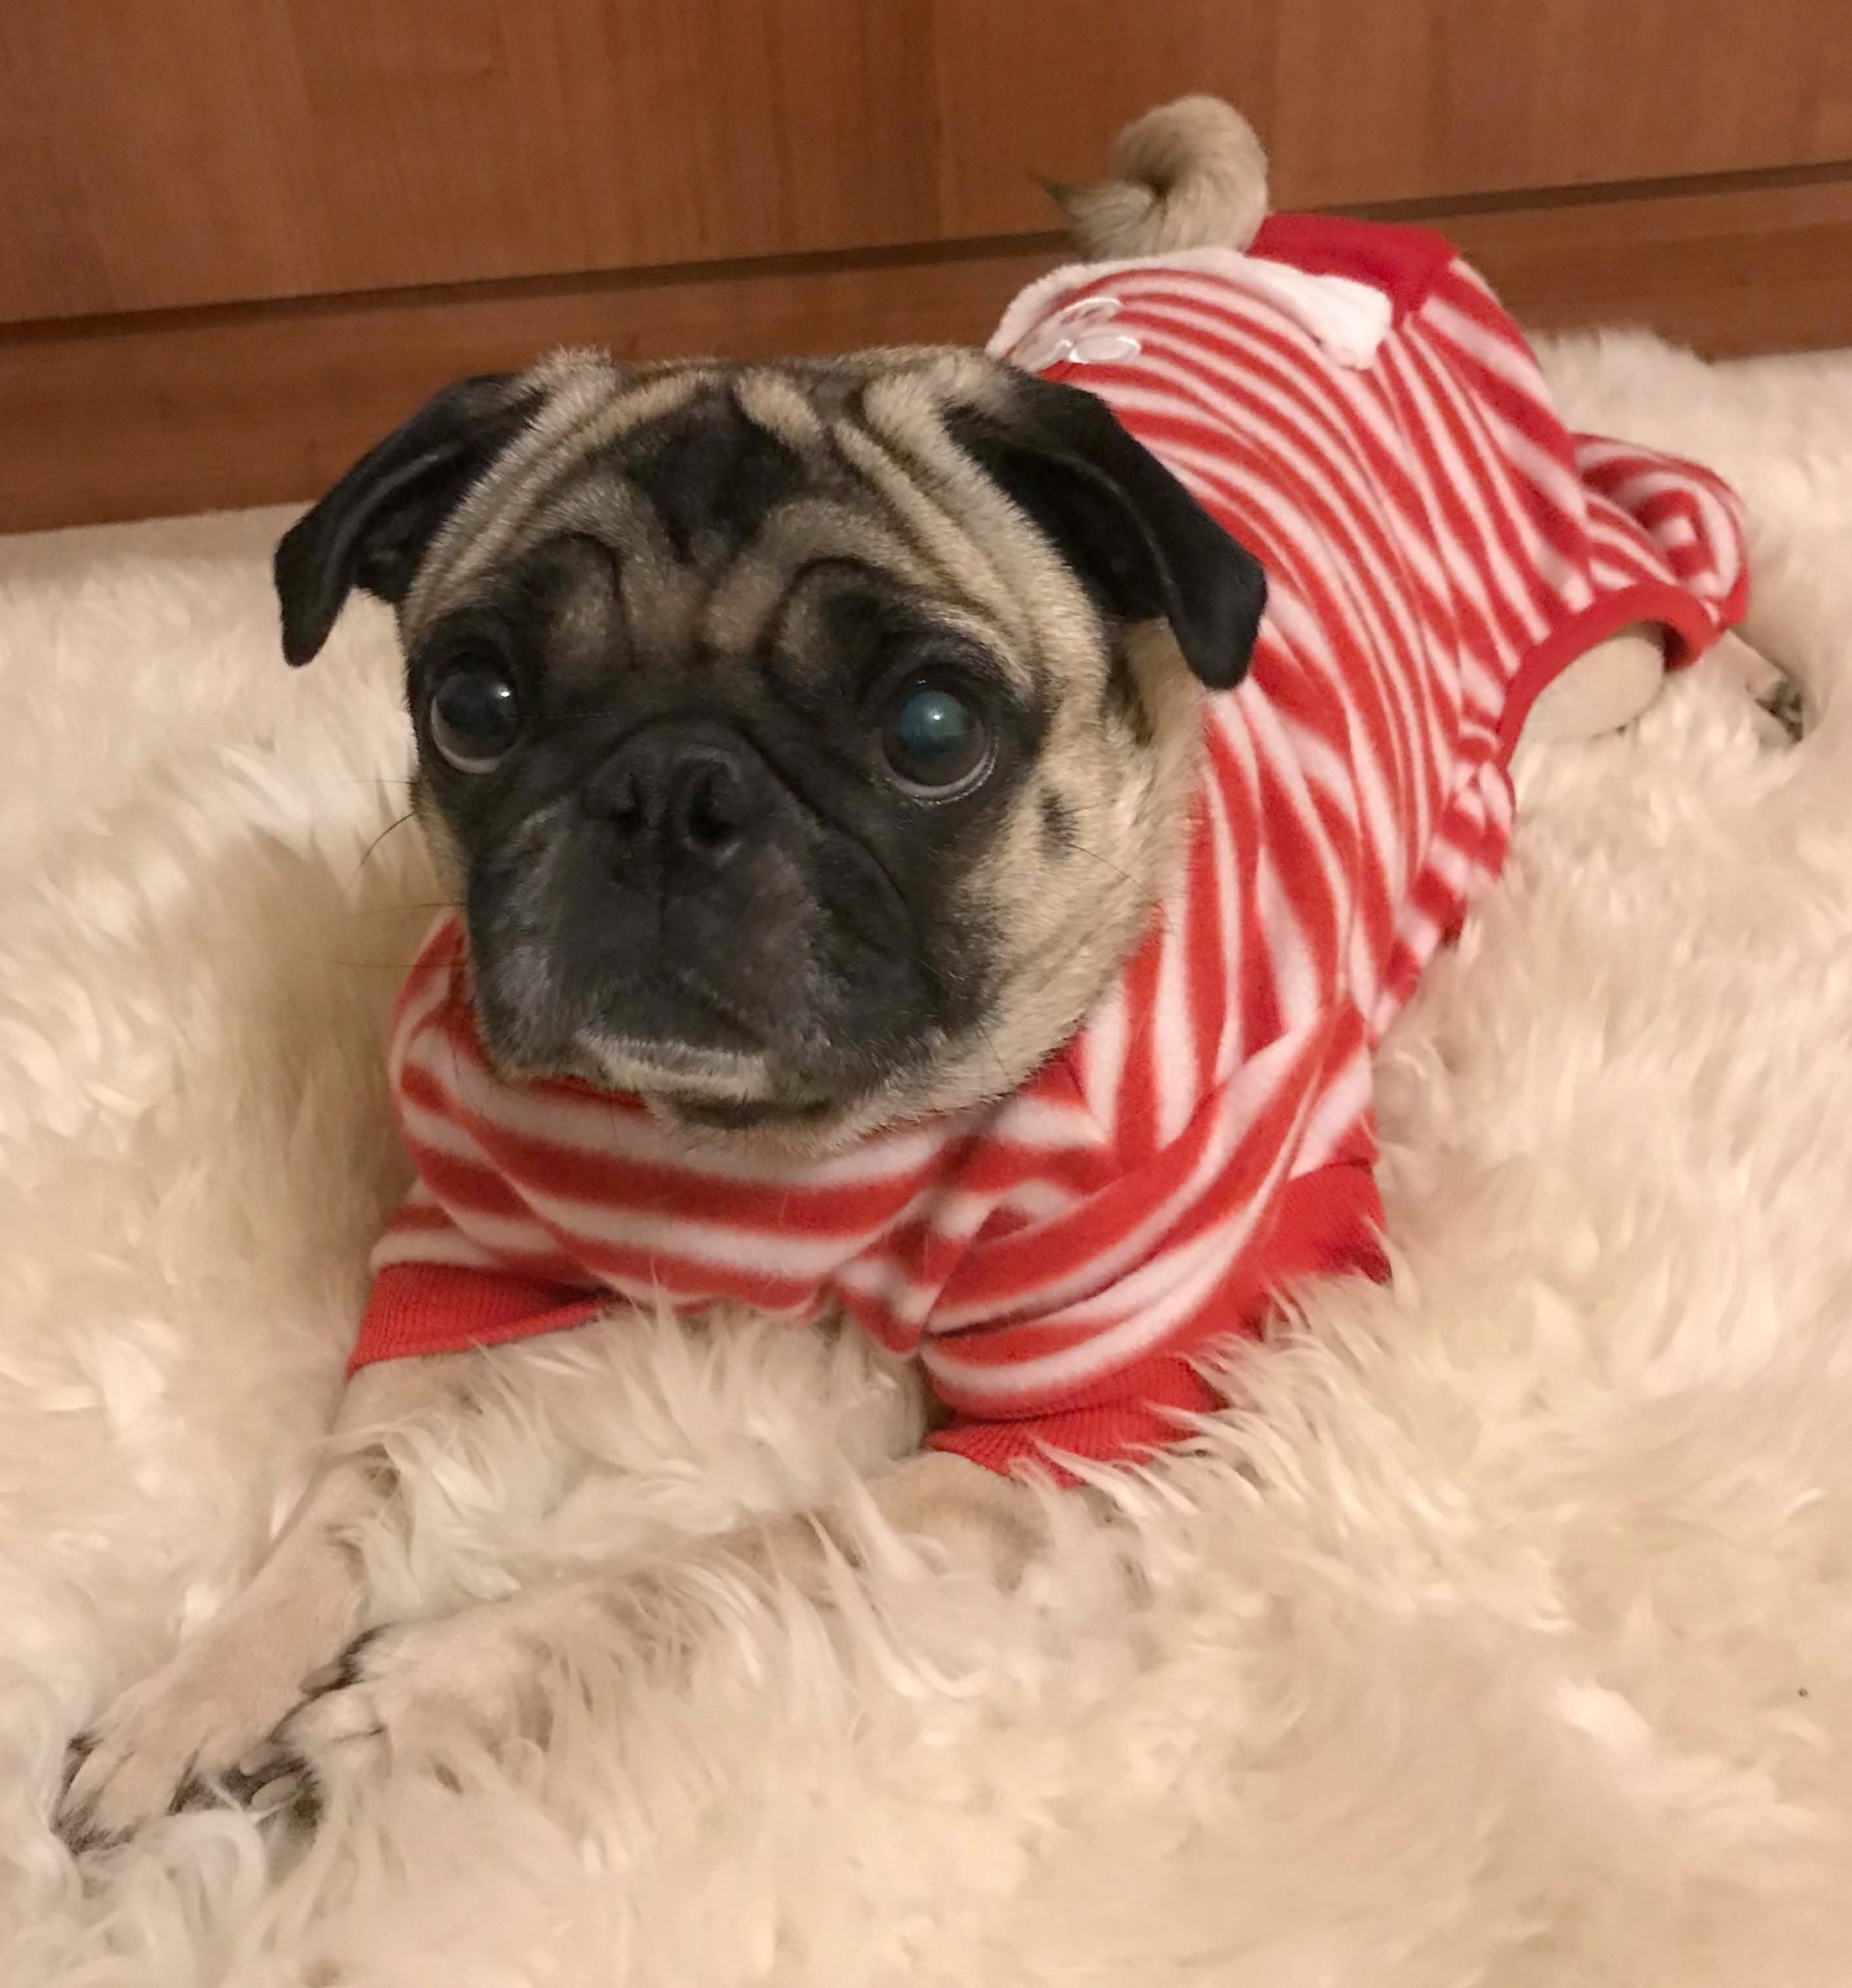 Thank You From Pugpalooza!